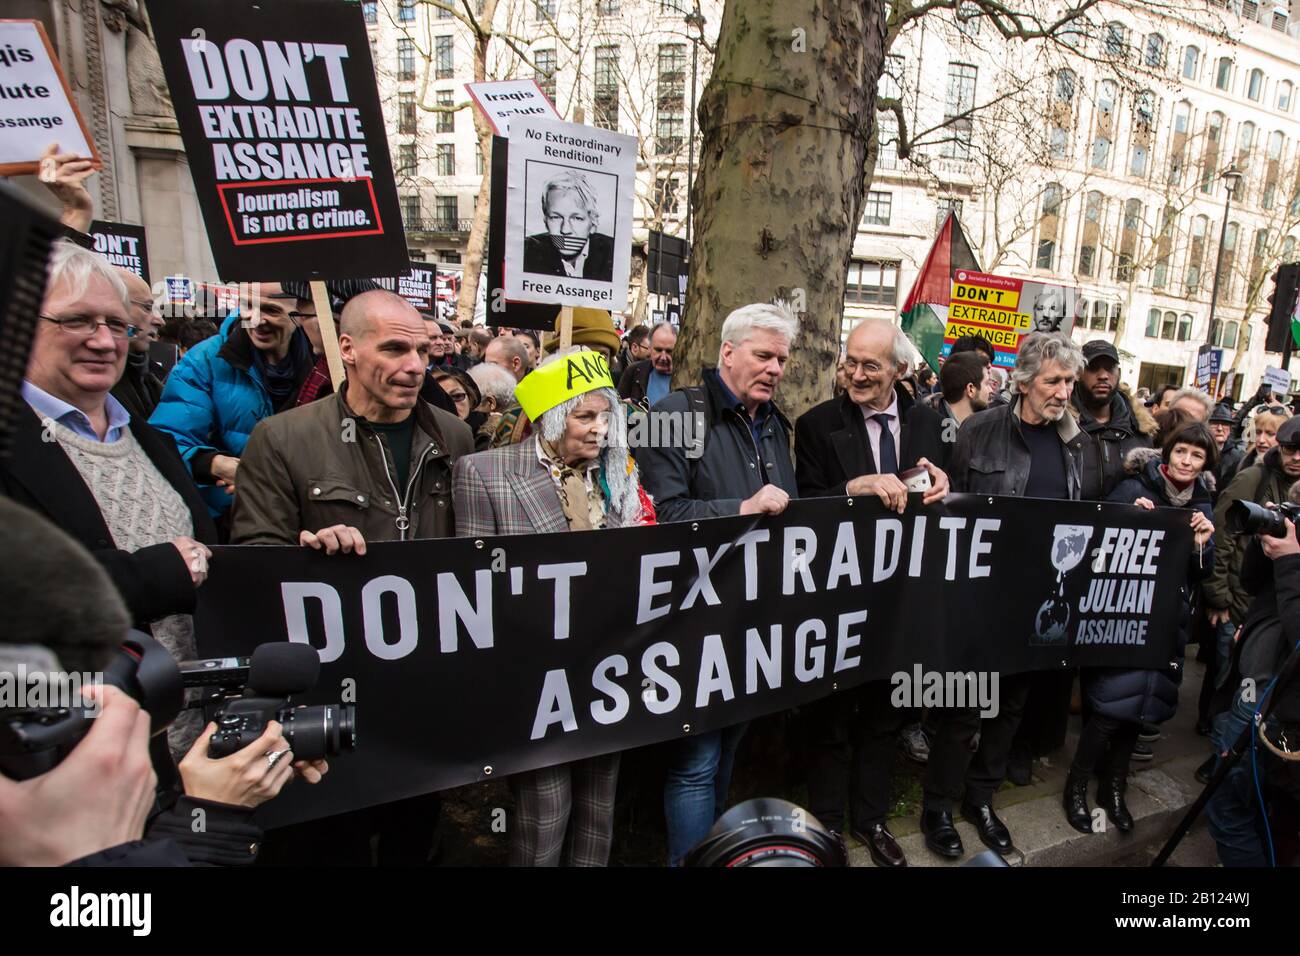 London, UK. 22 February 2020. L-R: Yanis Varoufakis, Vivienne Westwood, Kristin Hrafnsson (Wikileaks Editor-in-chief), John Shipton ( Julian Assange’s father) and Roger Walters. Protesters marched and then held a rally in central London to oppose the extradition of Julian Assange to the USA. The event organised by The Don’t Extradite Assange campaign takes place ahead of a trial starting on Monday which could see the Wikileaks founder facing a life sentence in the USA. David Rowe/Alamy Live News. Stock Photo